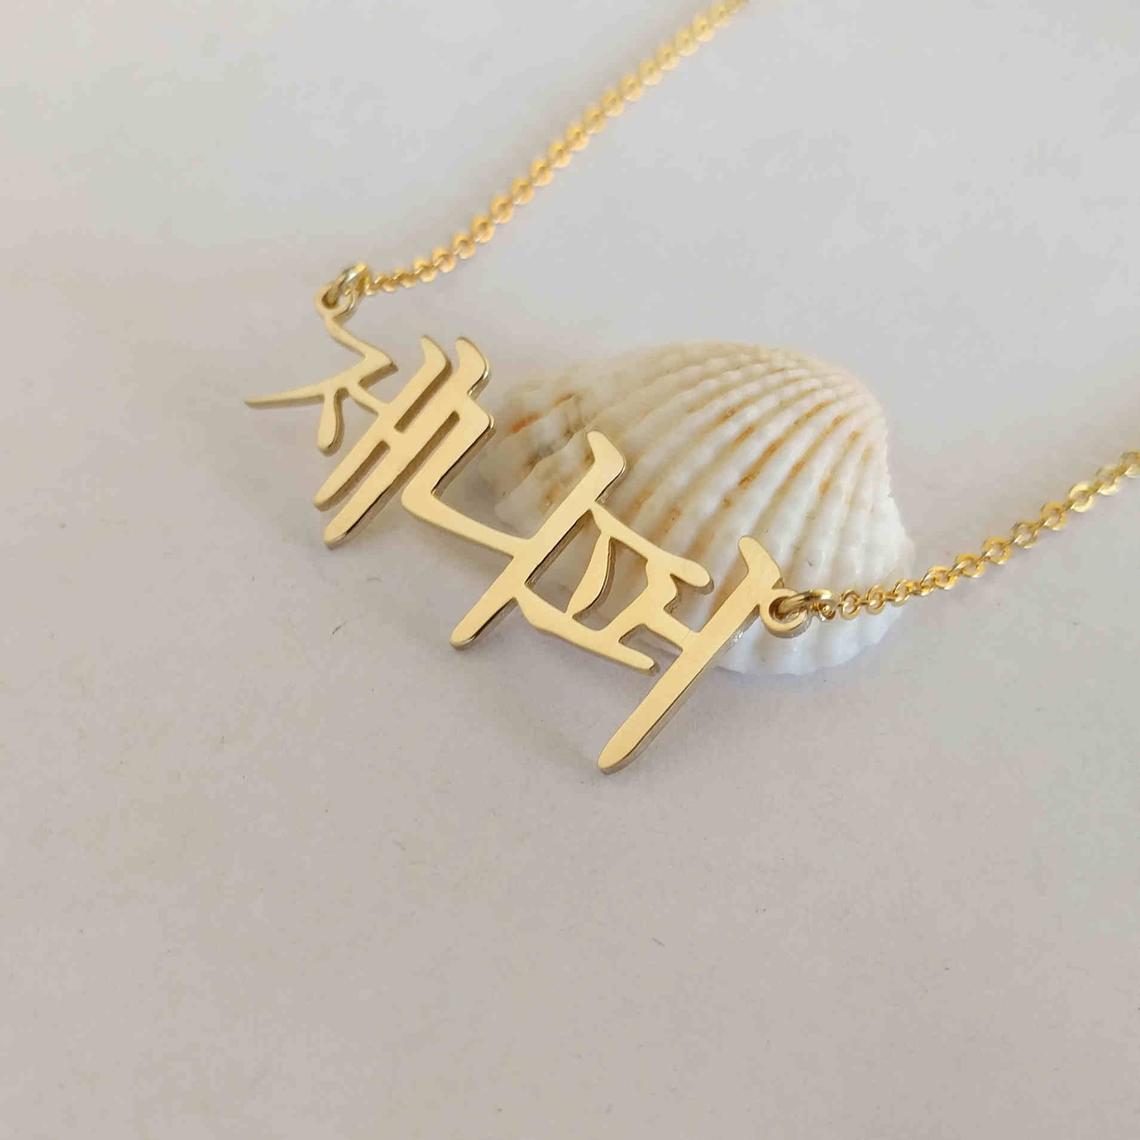 Personalized Korean Name Necklace - Happy Maker